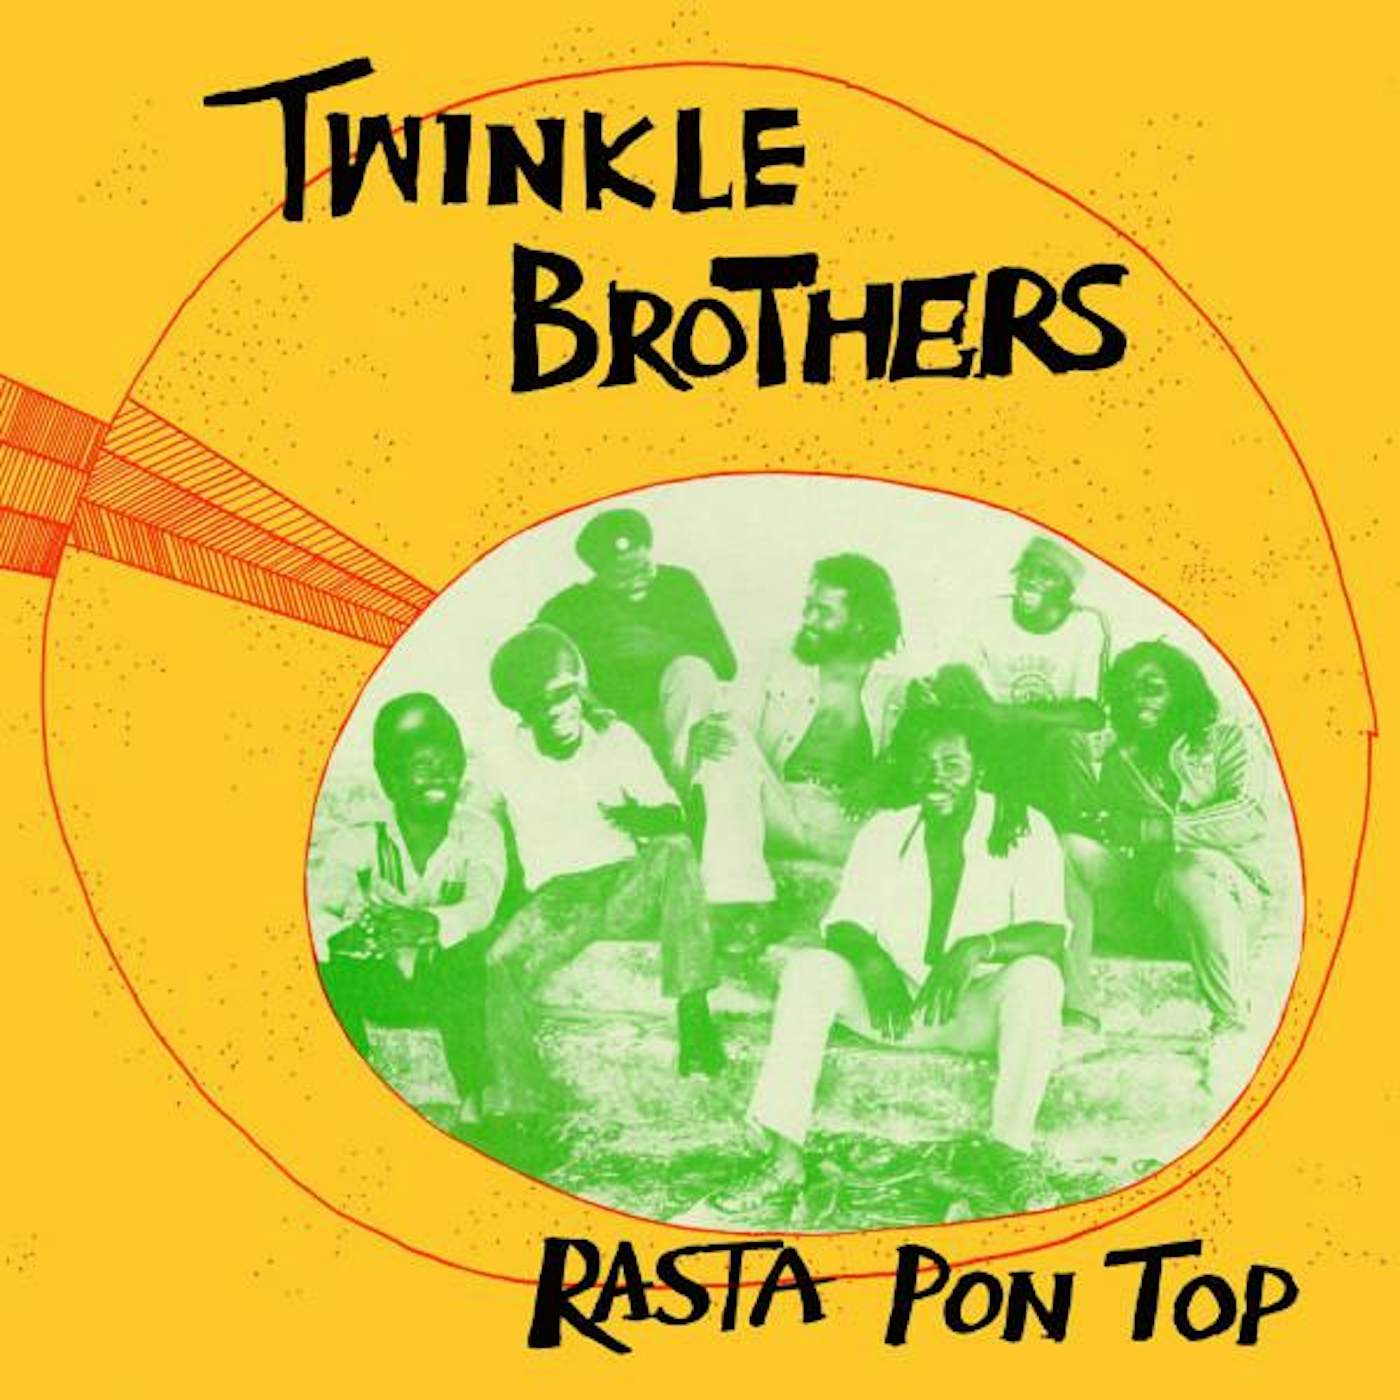 The Twinkle Brothers RAST PON TOP CD